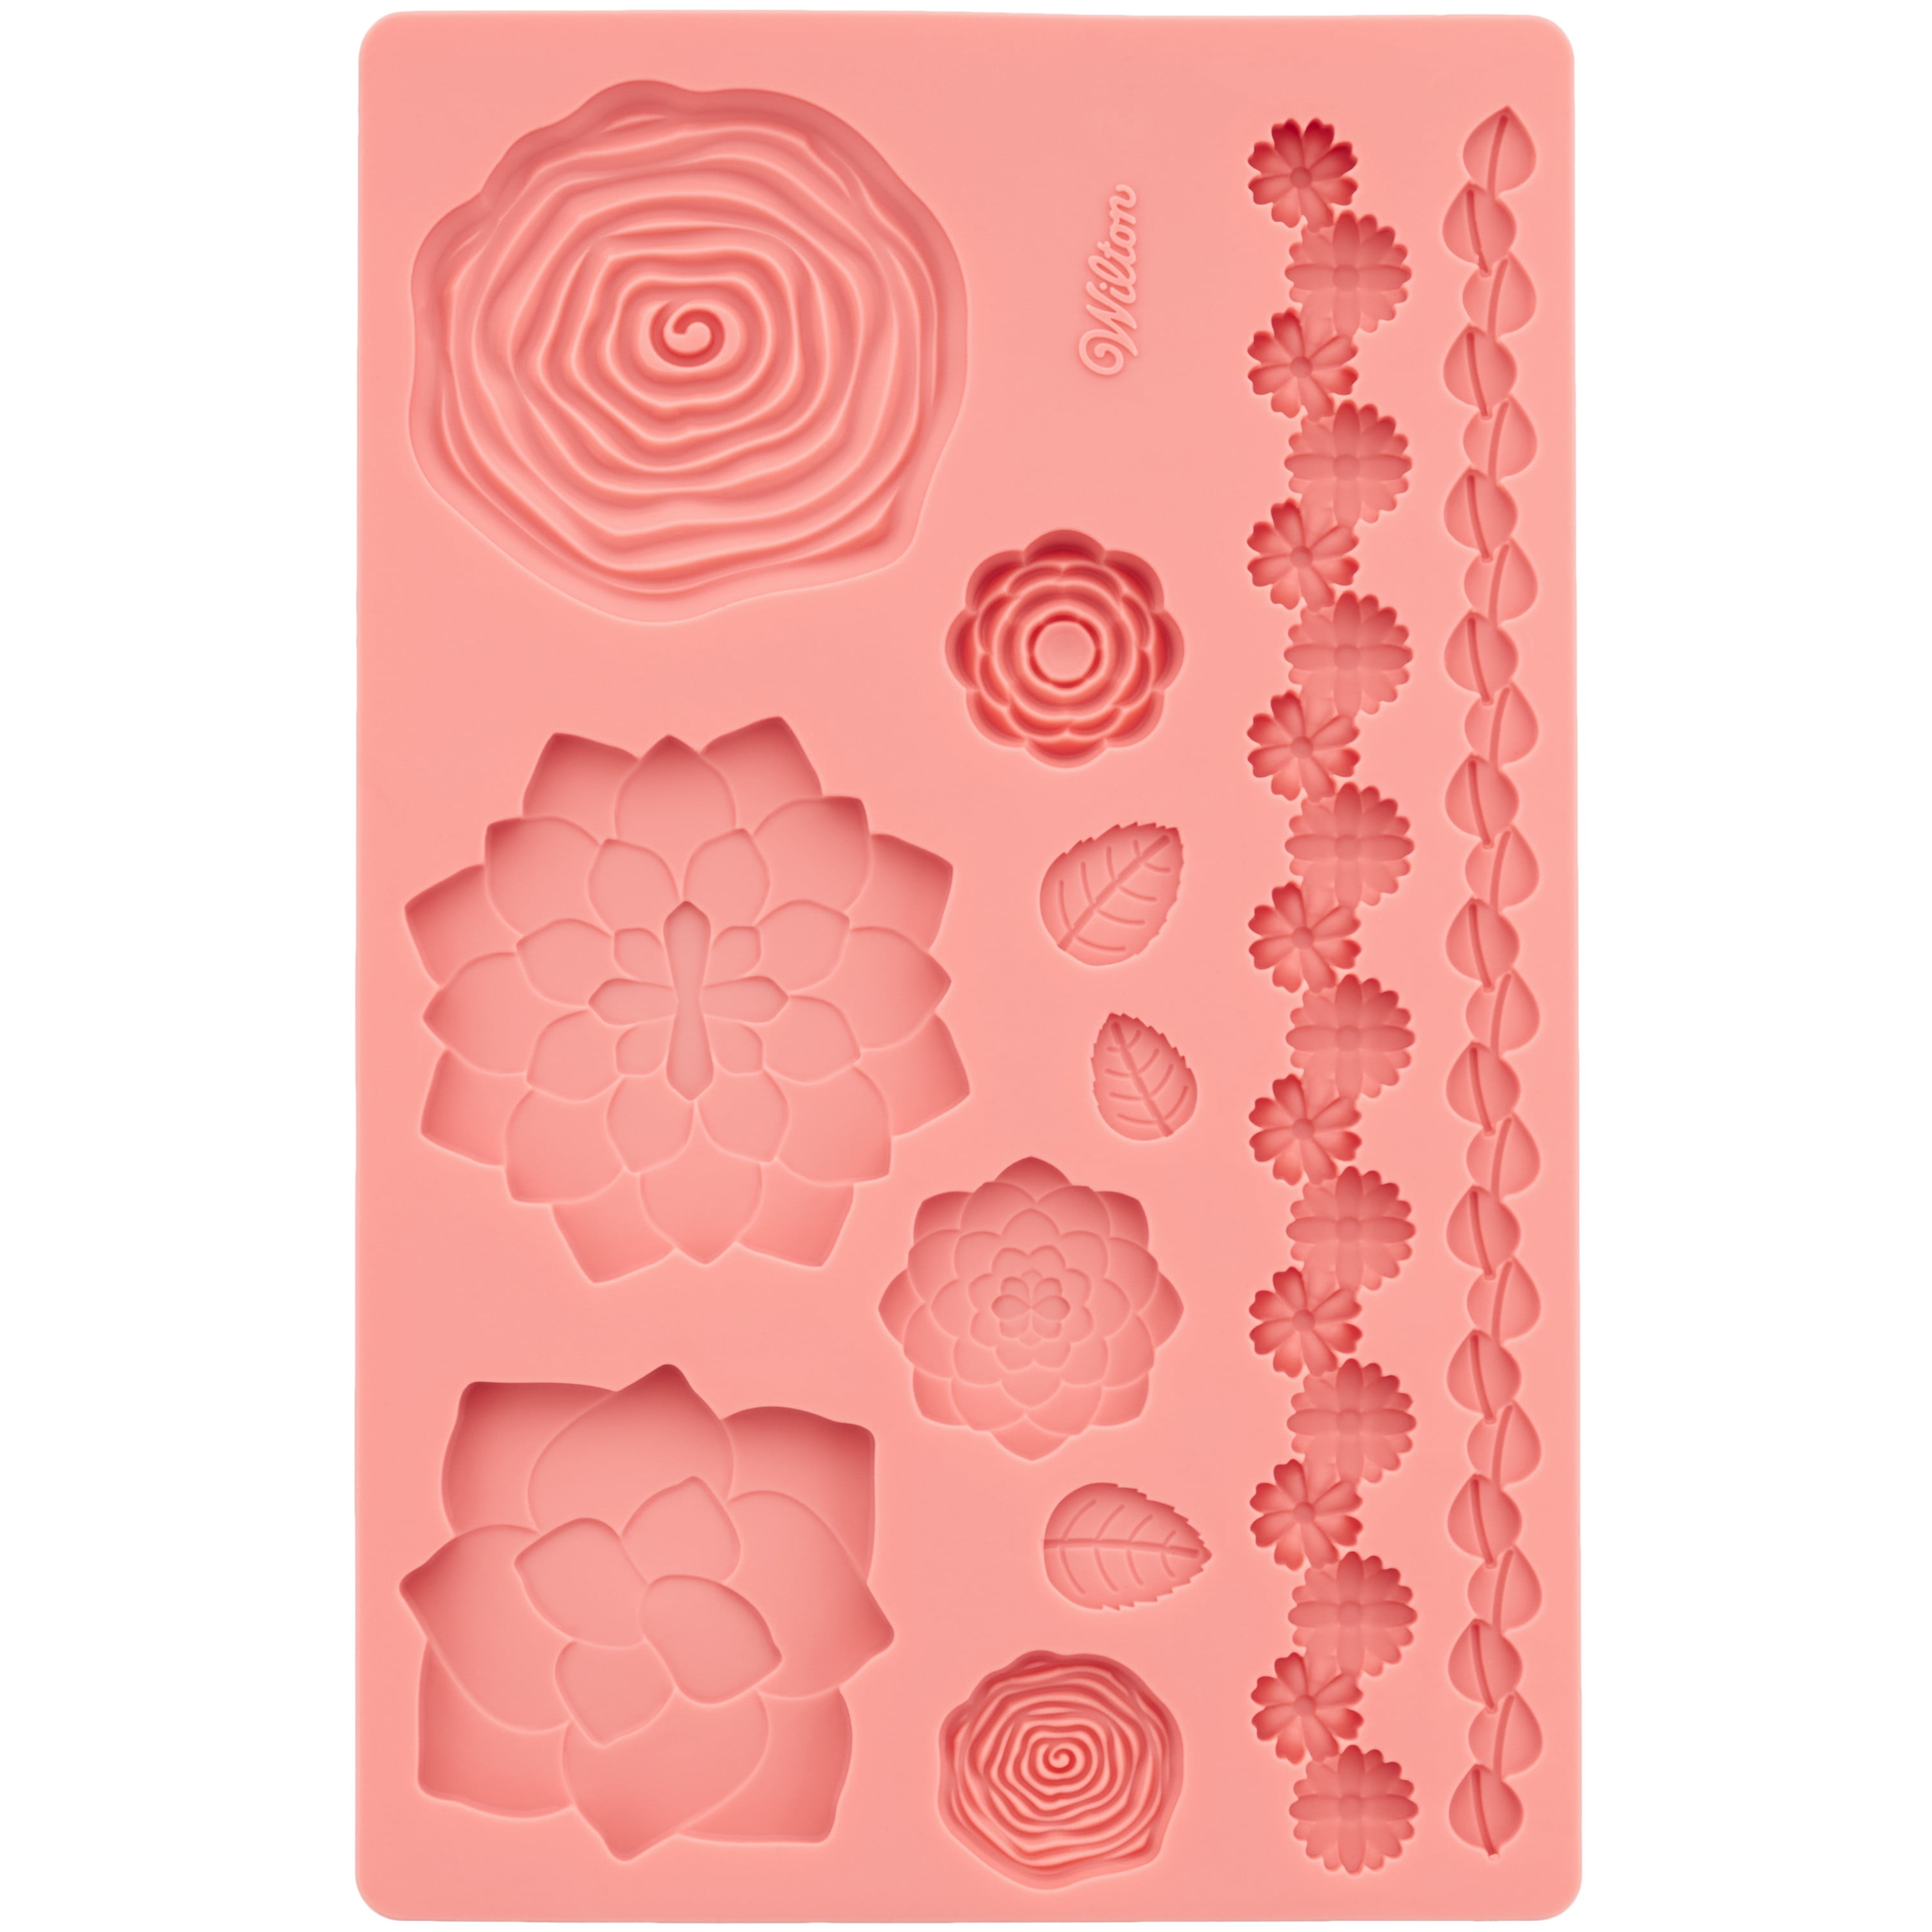 Silicone Flower Molds - 8 Shaped Flower Mold 